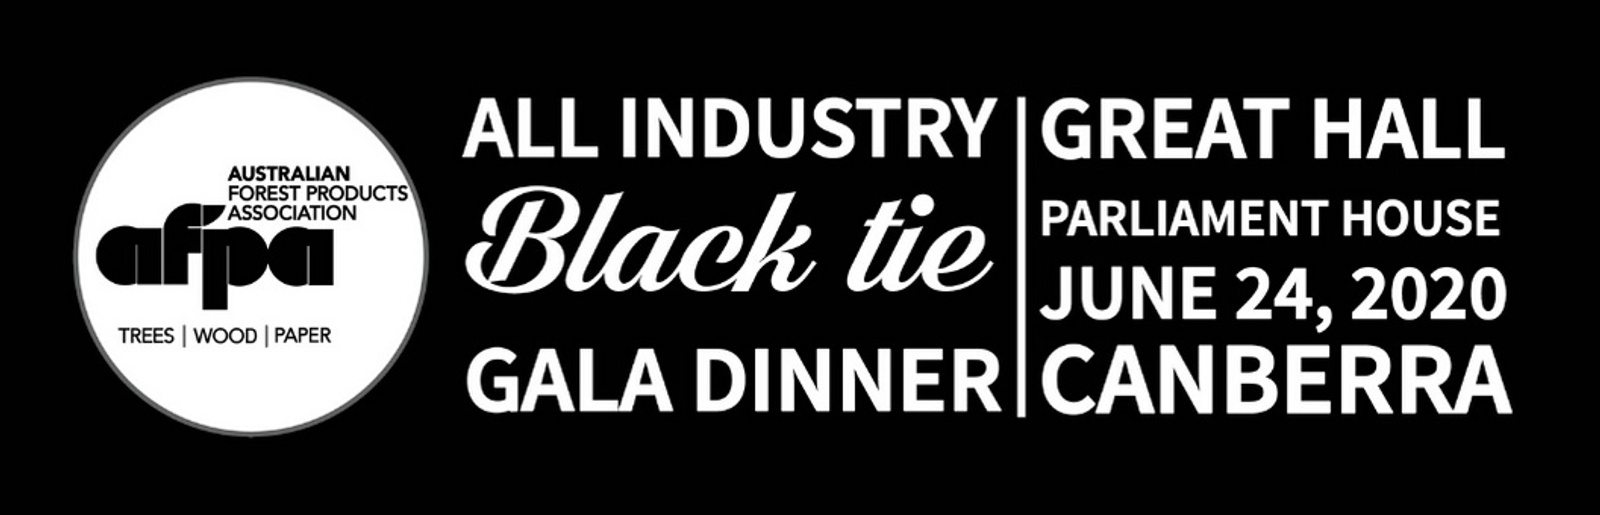 Banner image for AFPA 2020 Gala Dinner at Parliament House